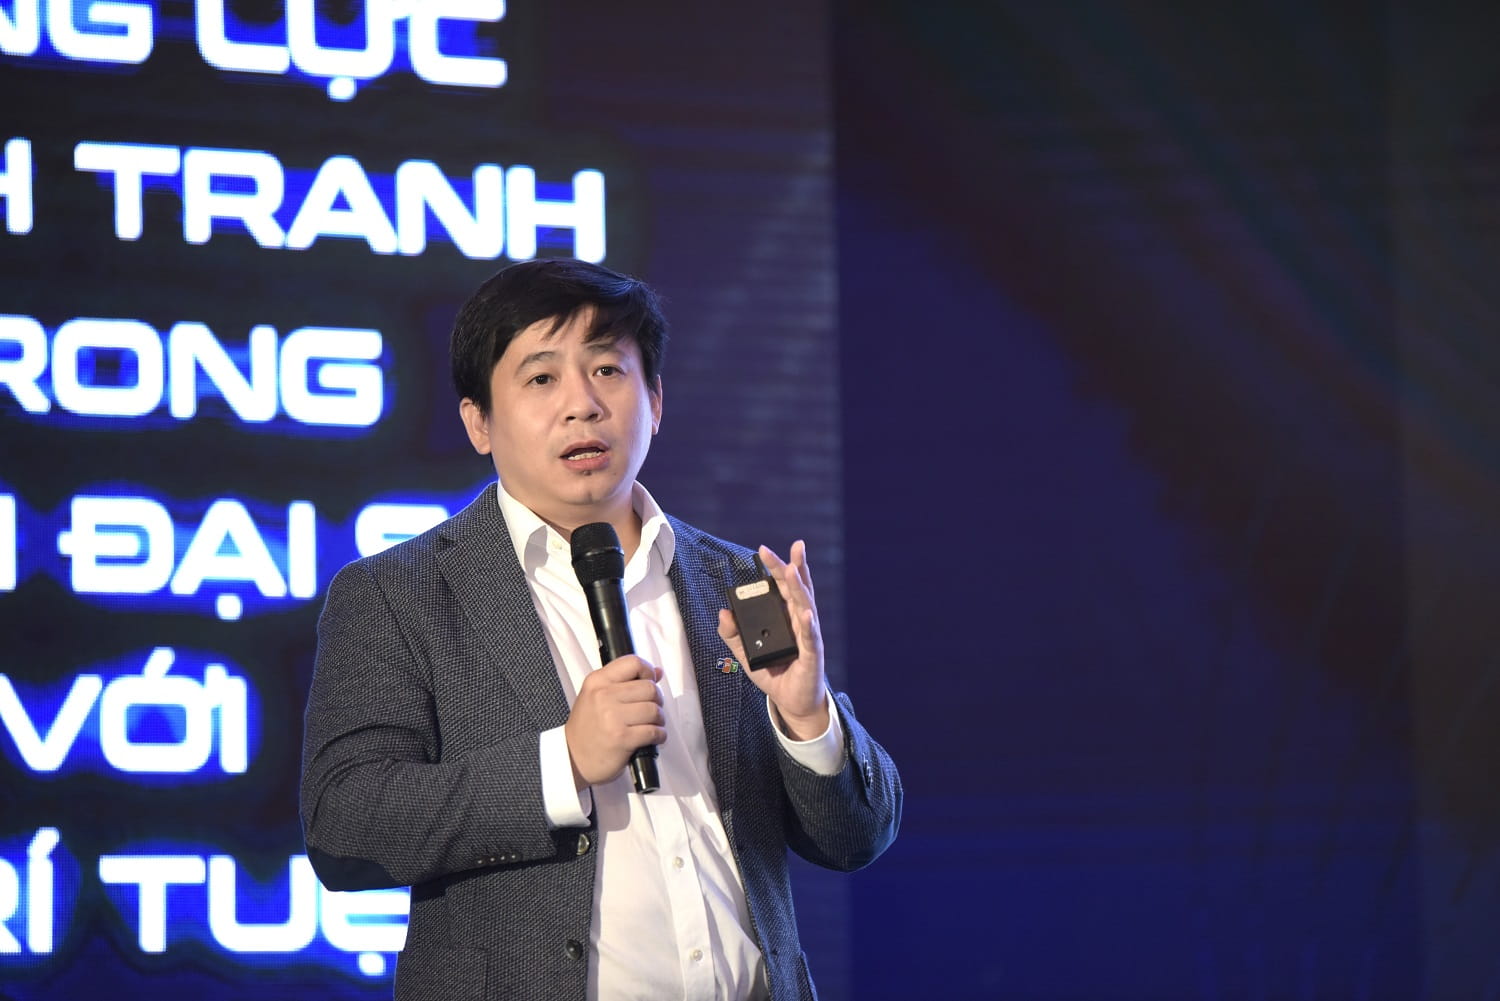 Mr. Vu Anh Tu, FPT's CTO, delivered a speech at the Conference of AI4VN